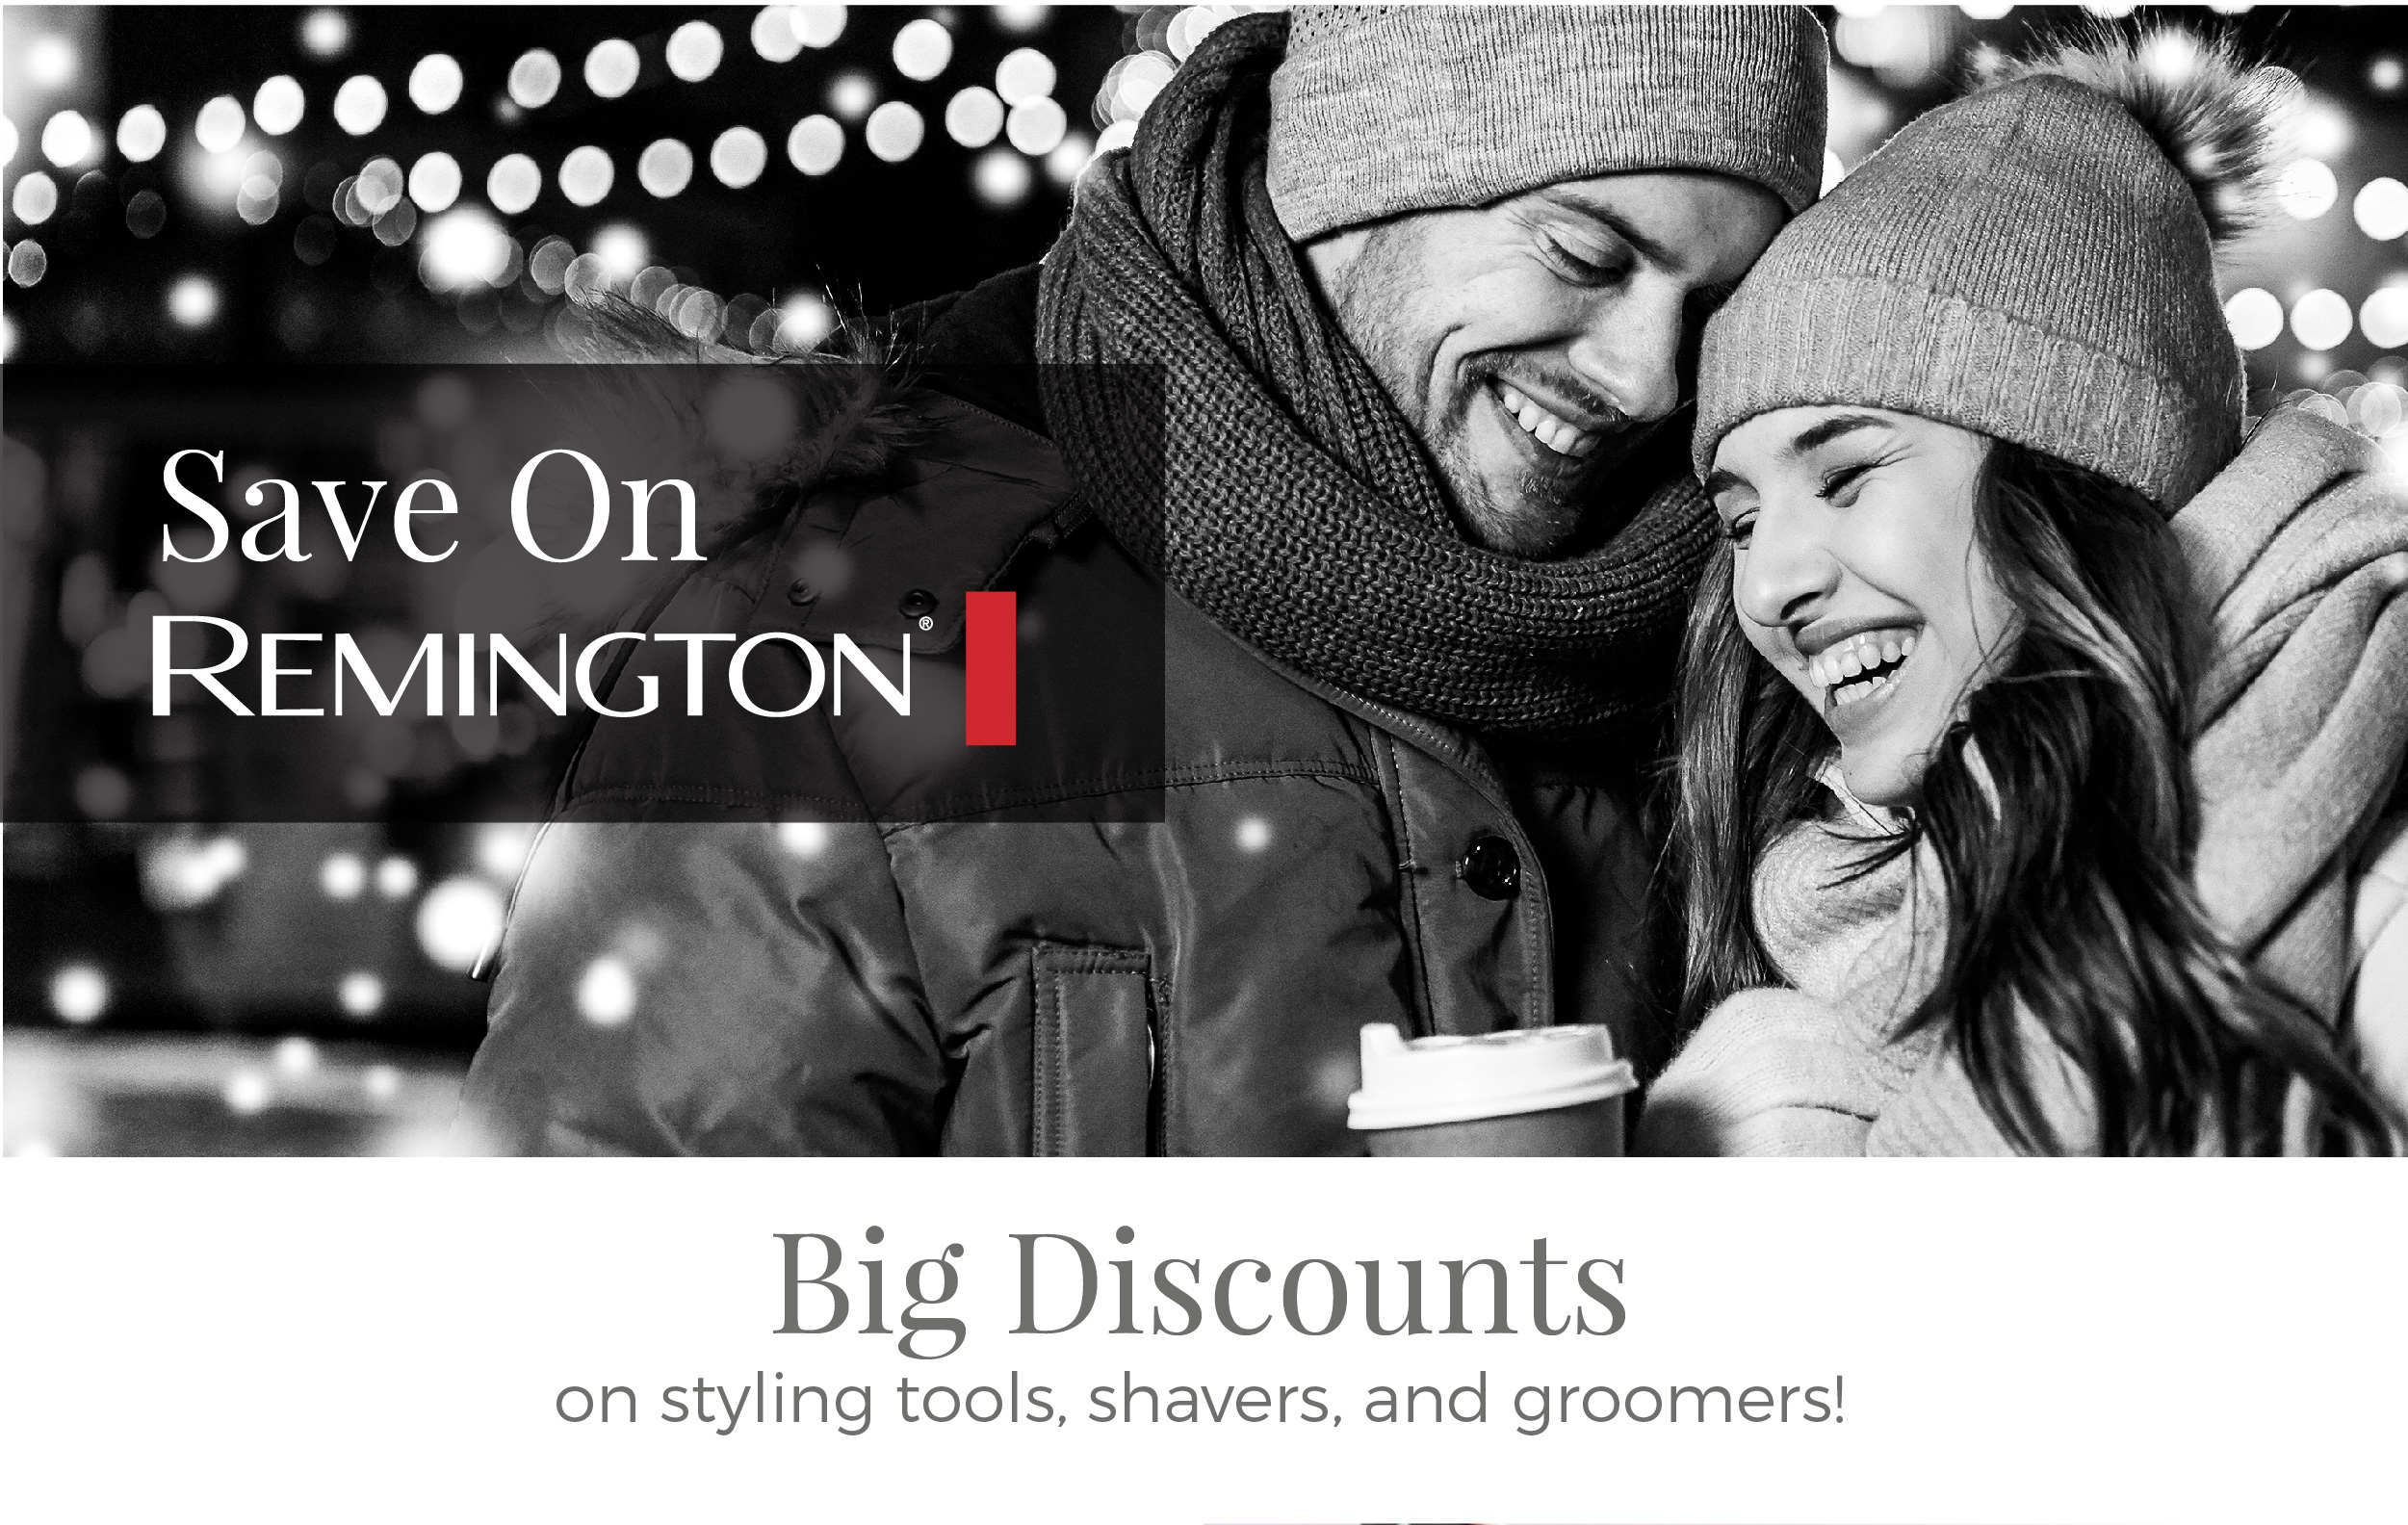 Save On Remington. Big Discounts on styling tools, shavers and groomers!